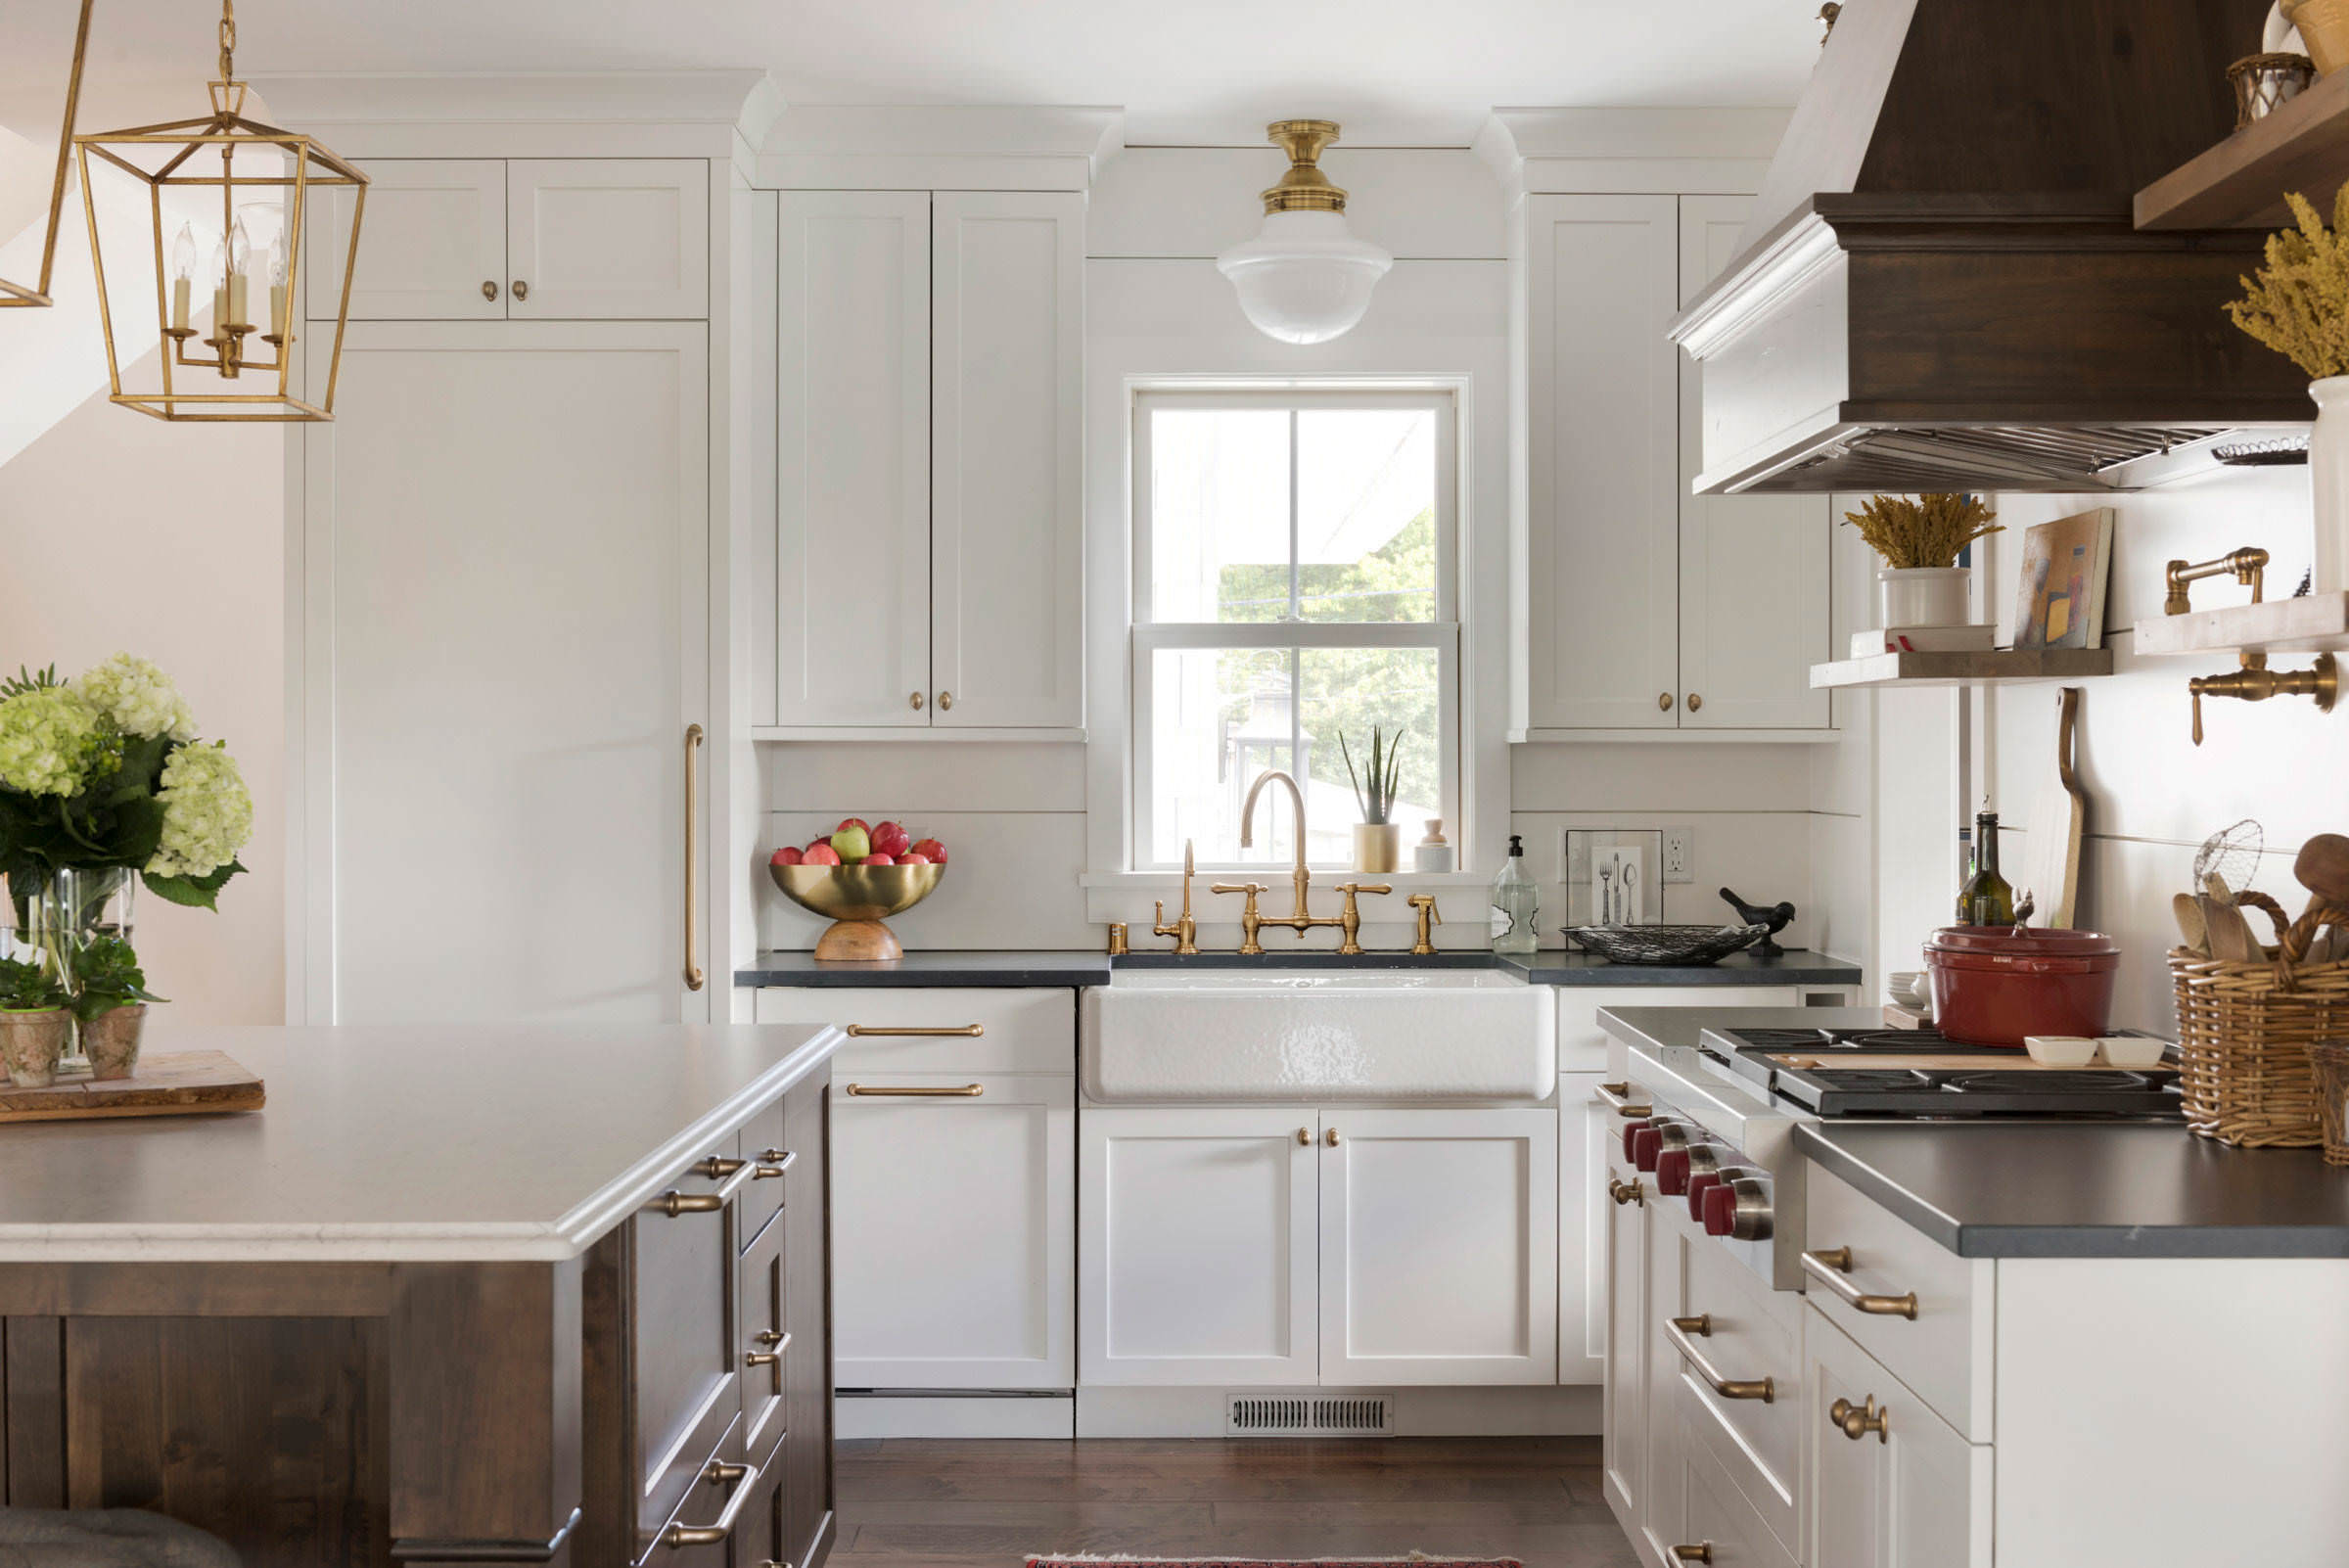 How to get the Farmhouse Style Kitchen